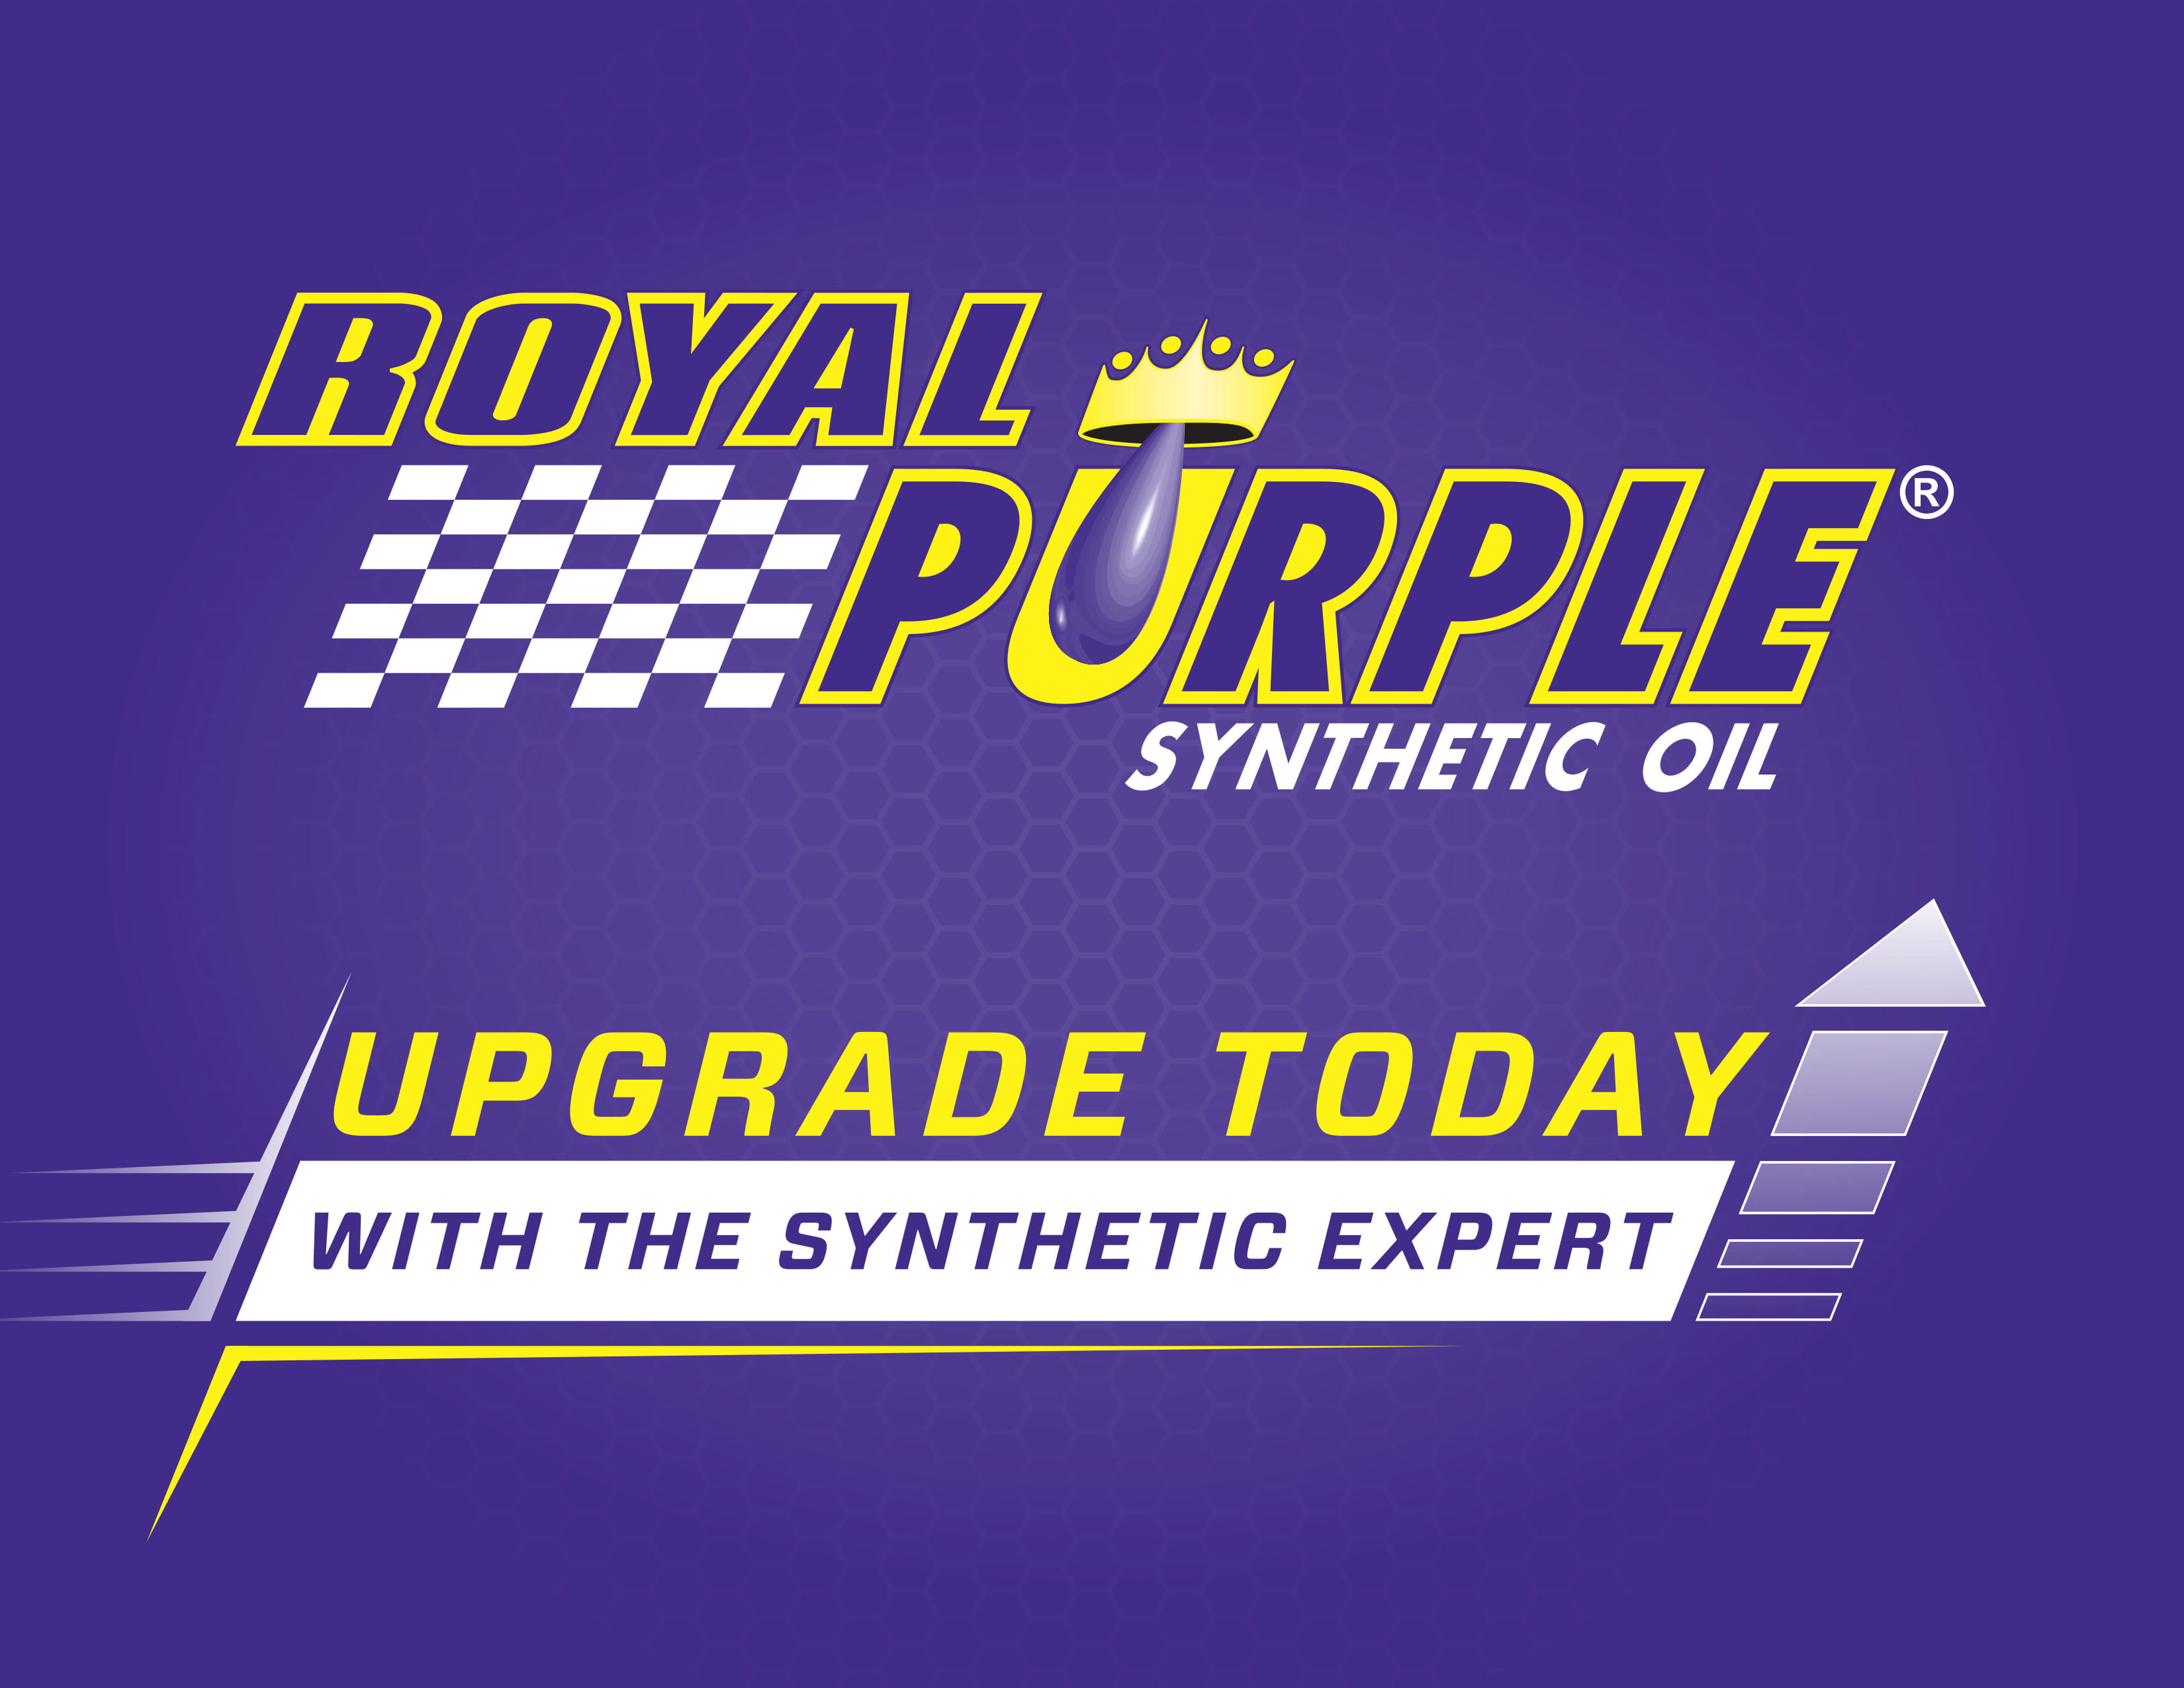 Royal Purple 12320 Max ATF High Performance Multi-Spec Synthetic Automatic  Transmission Fluid - 1 qt. (Case of 12)